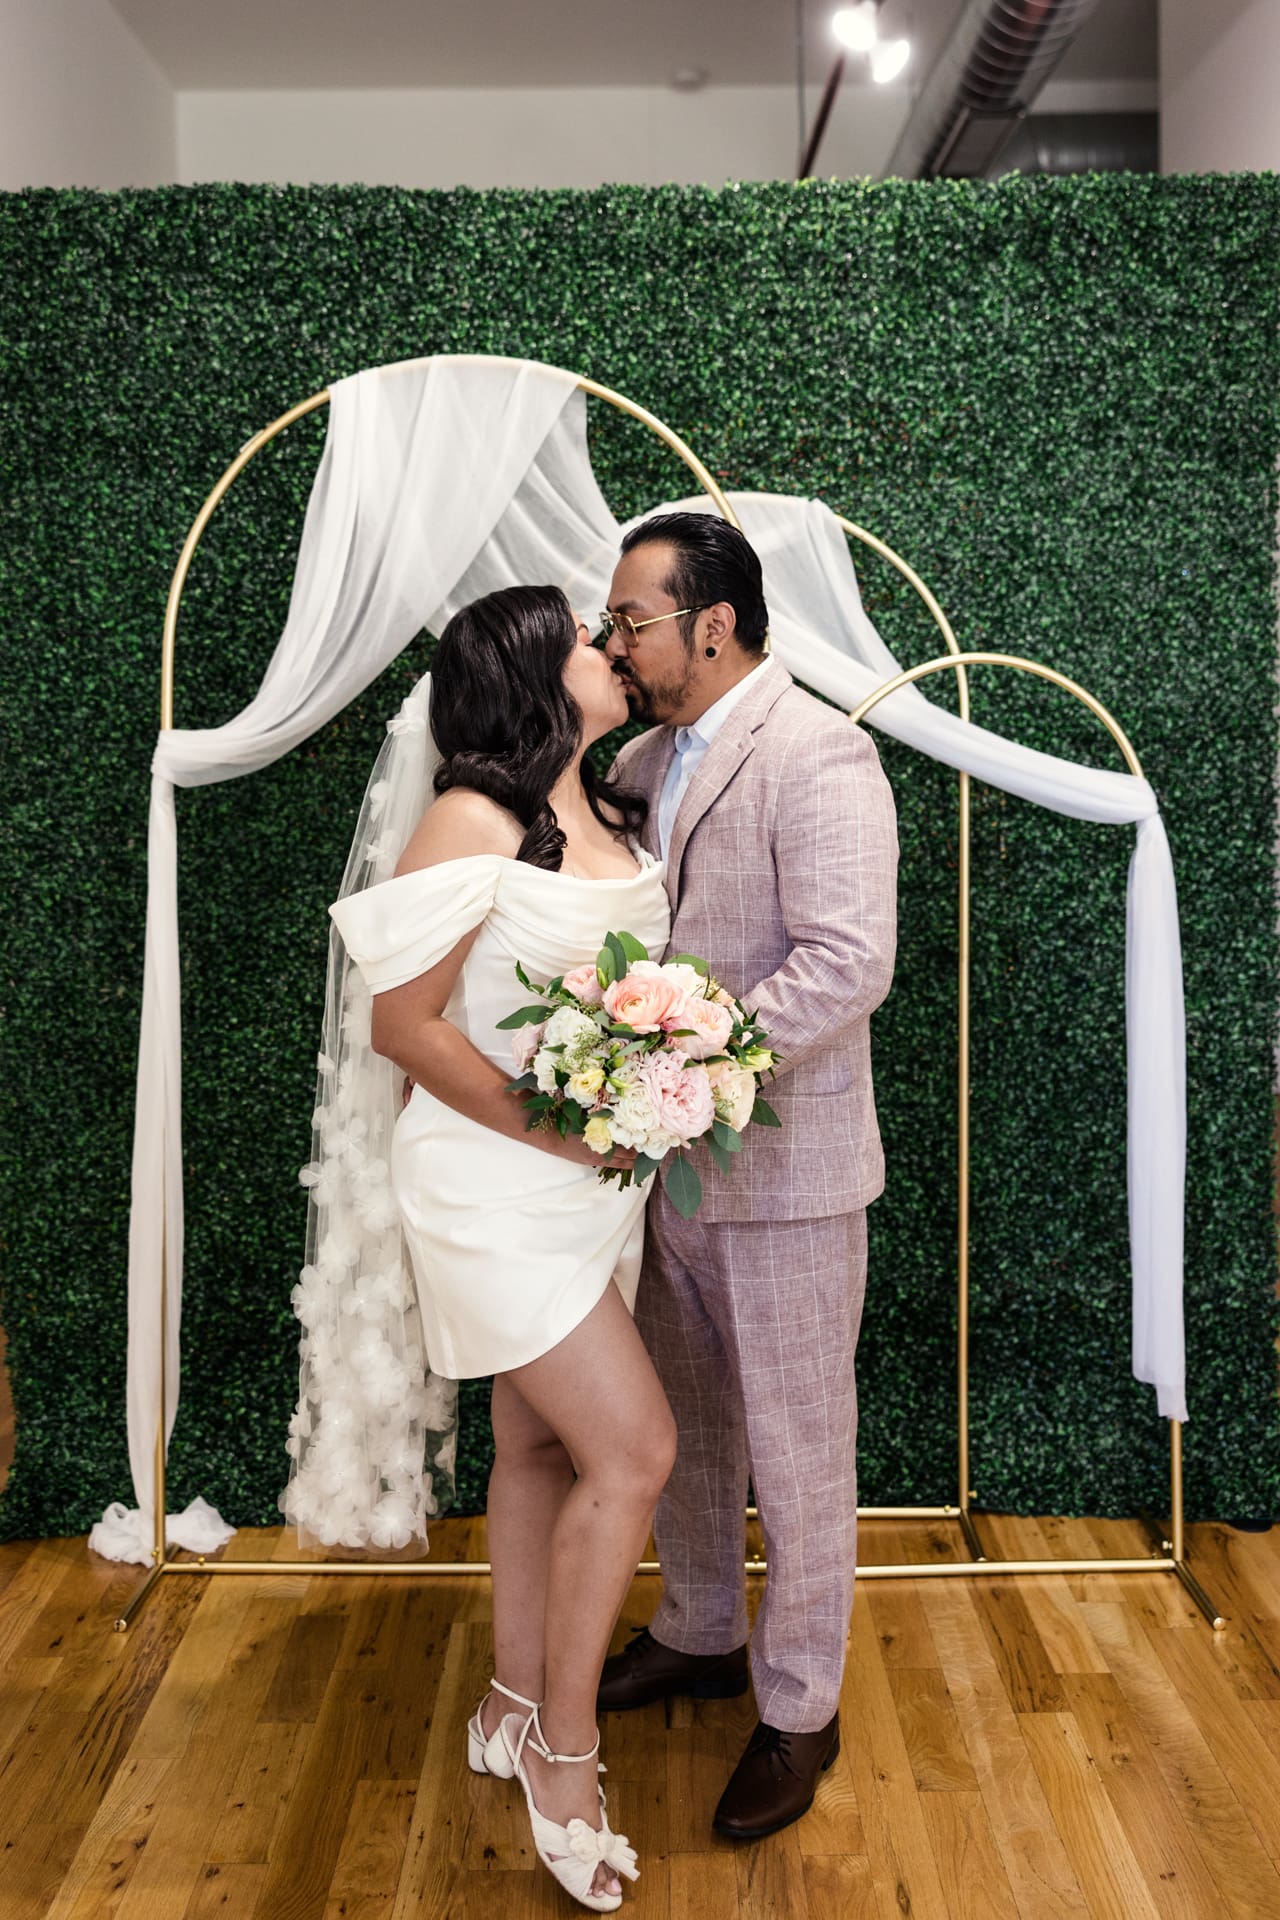 Bride and groom kiss in front of greenery wall after their intimate wedding ceremony at P&M Studio Chicago